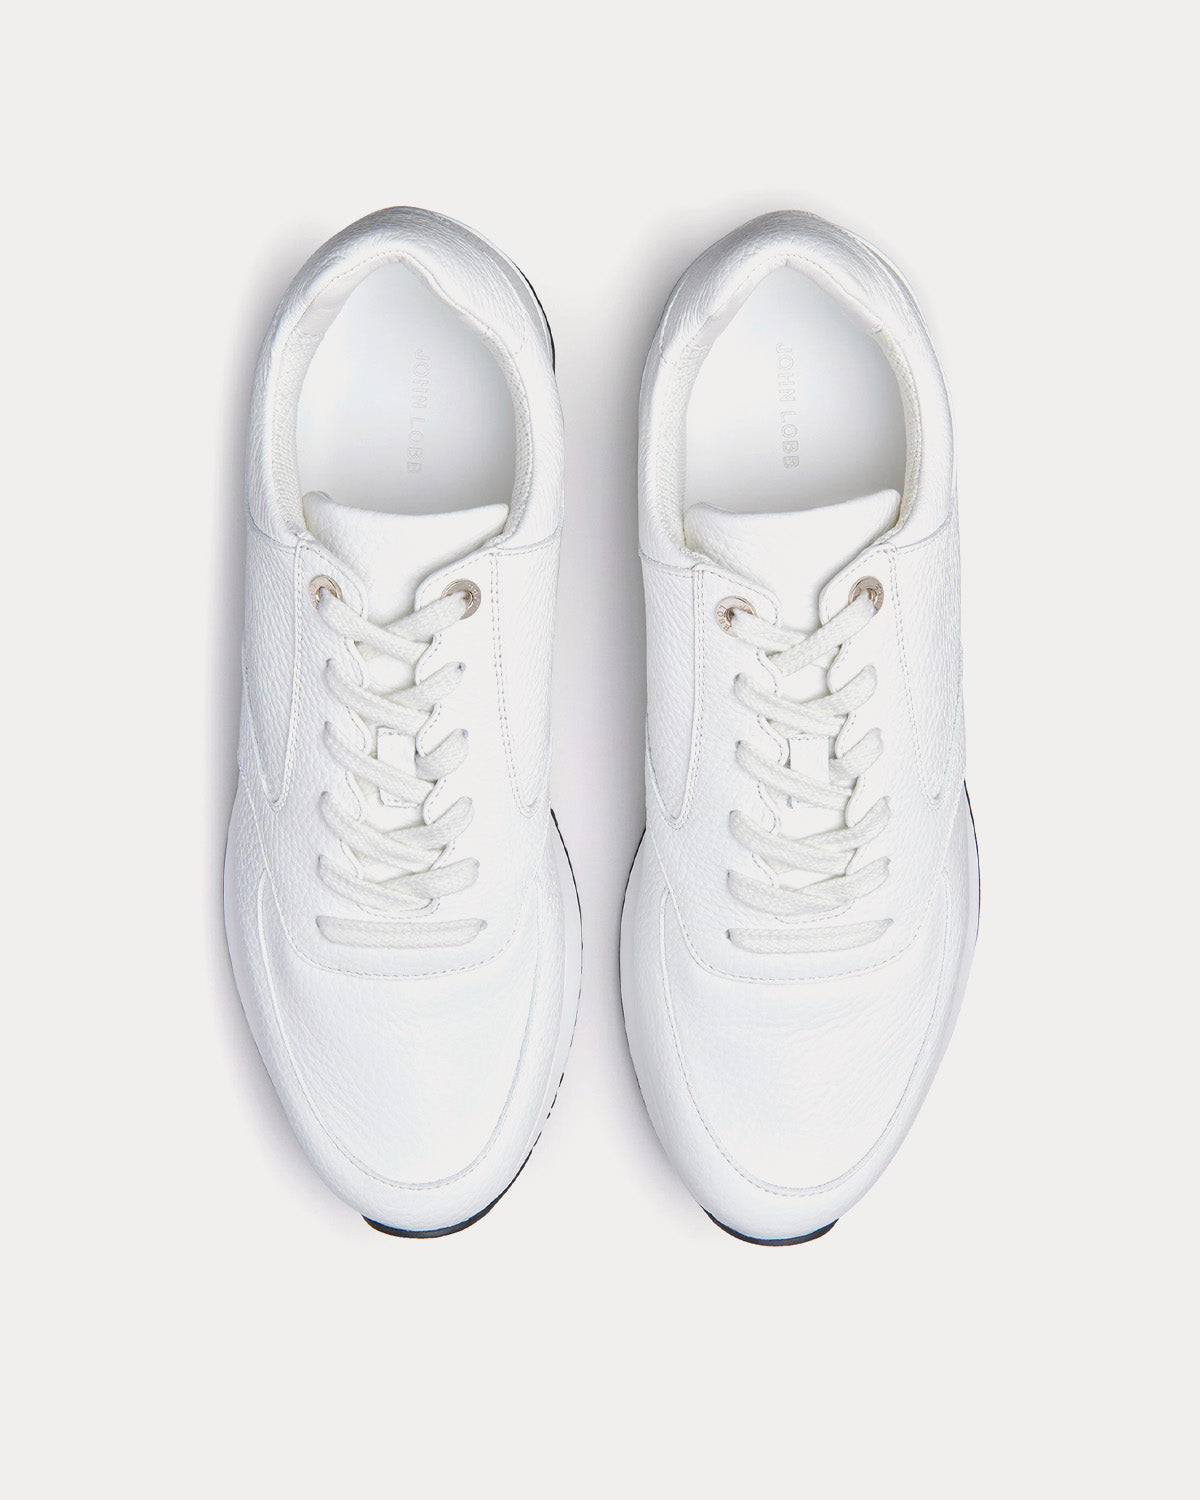 John Lobb - Foundry Grained Leather White Low Top Sneakers